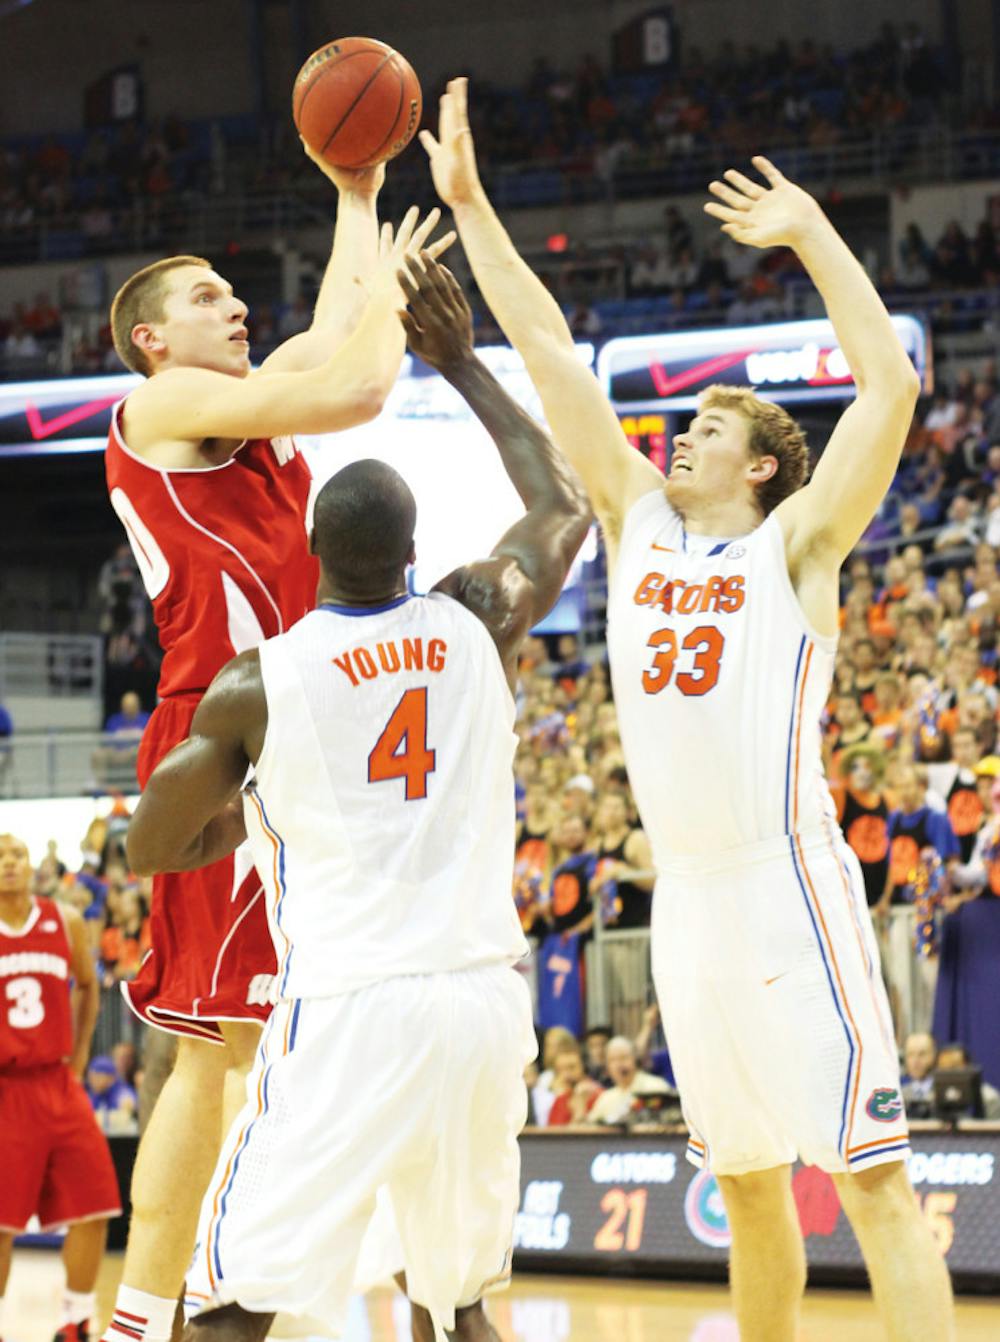 <p><span>Erik Murphy (33) and Patric Young (4) try to block a shot from Jared Berggren during Florida's 74-56 win at home against Wisconsin on Nov. 14th. While the No. 13 Gators are 9-2, their defensive efficiency numbers have been down the last two games.</span></p>
<div><span><br /></span></div>